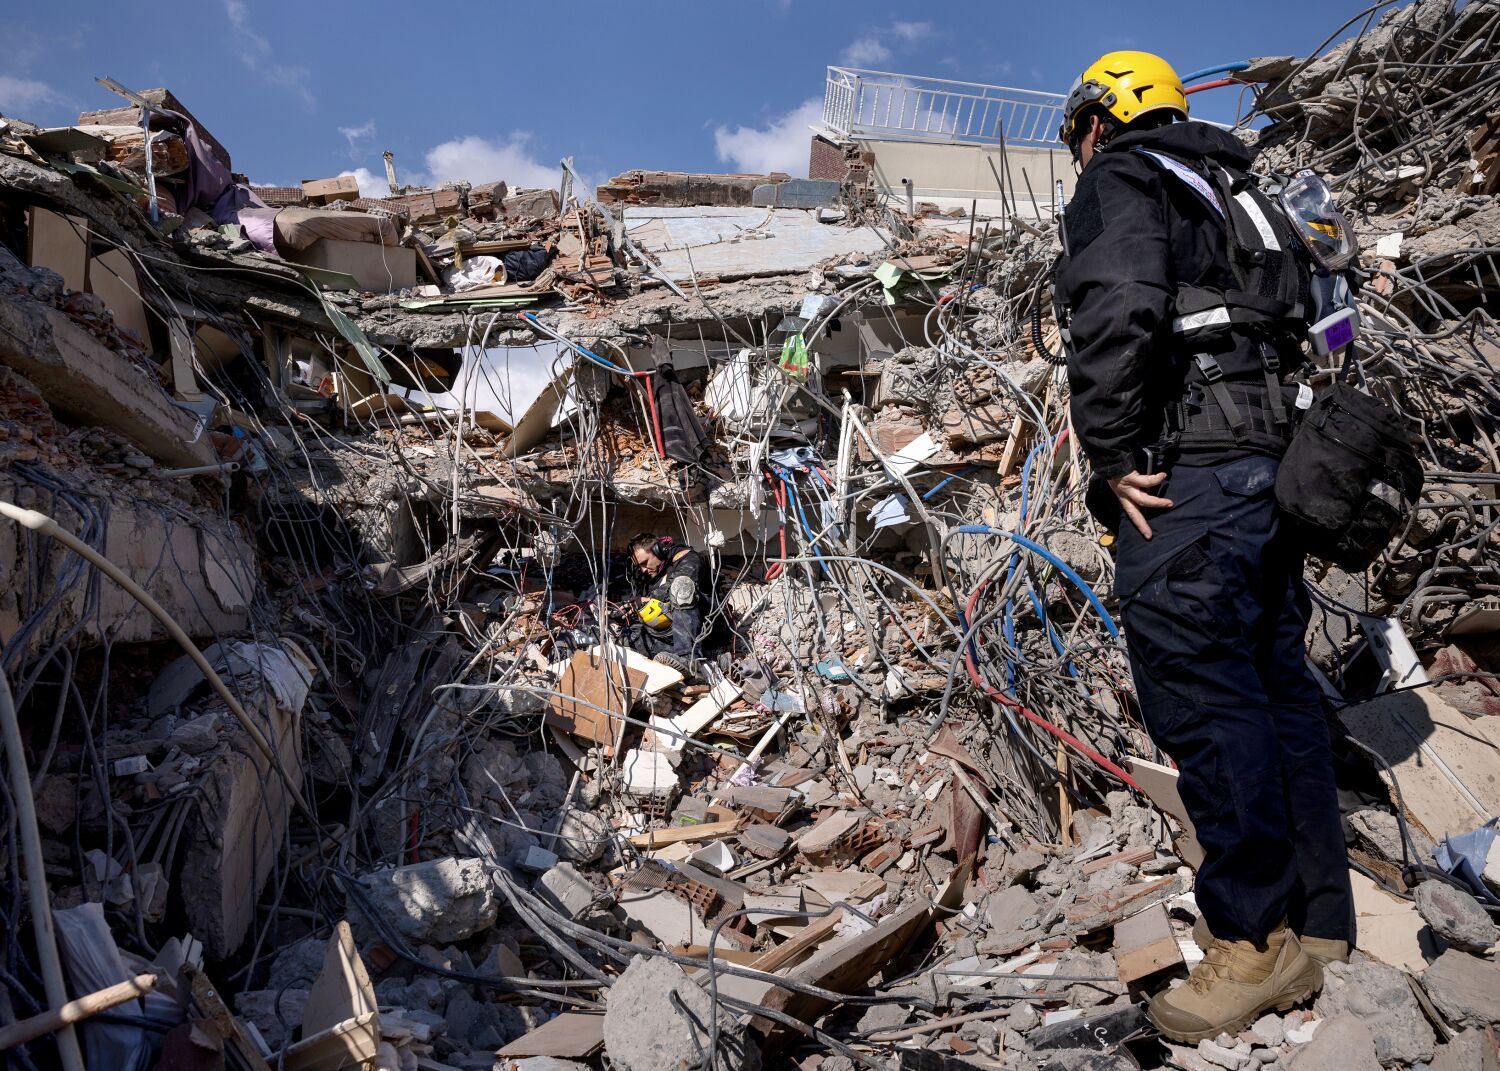 Los Angeles search-and-rescue teams return from Turkey after devastating earthquake